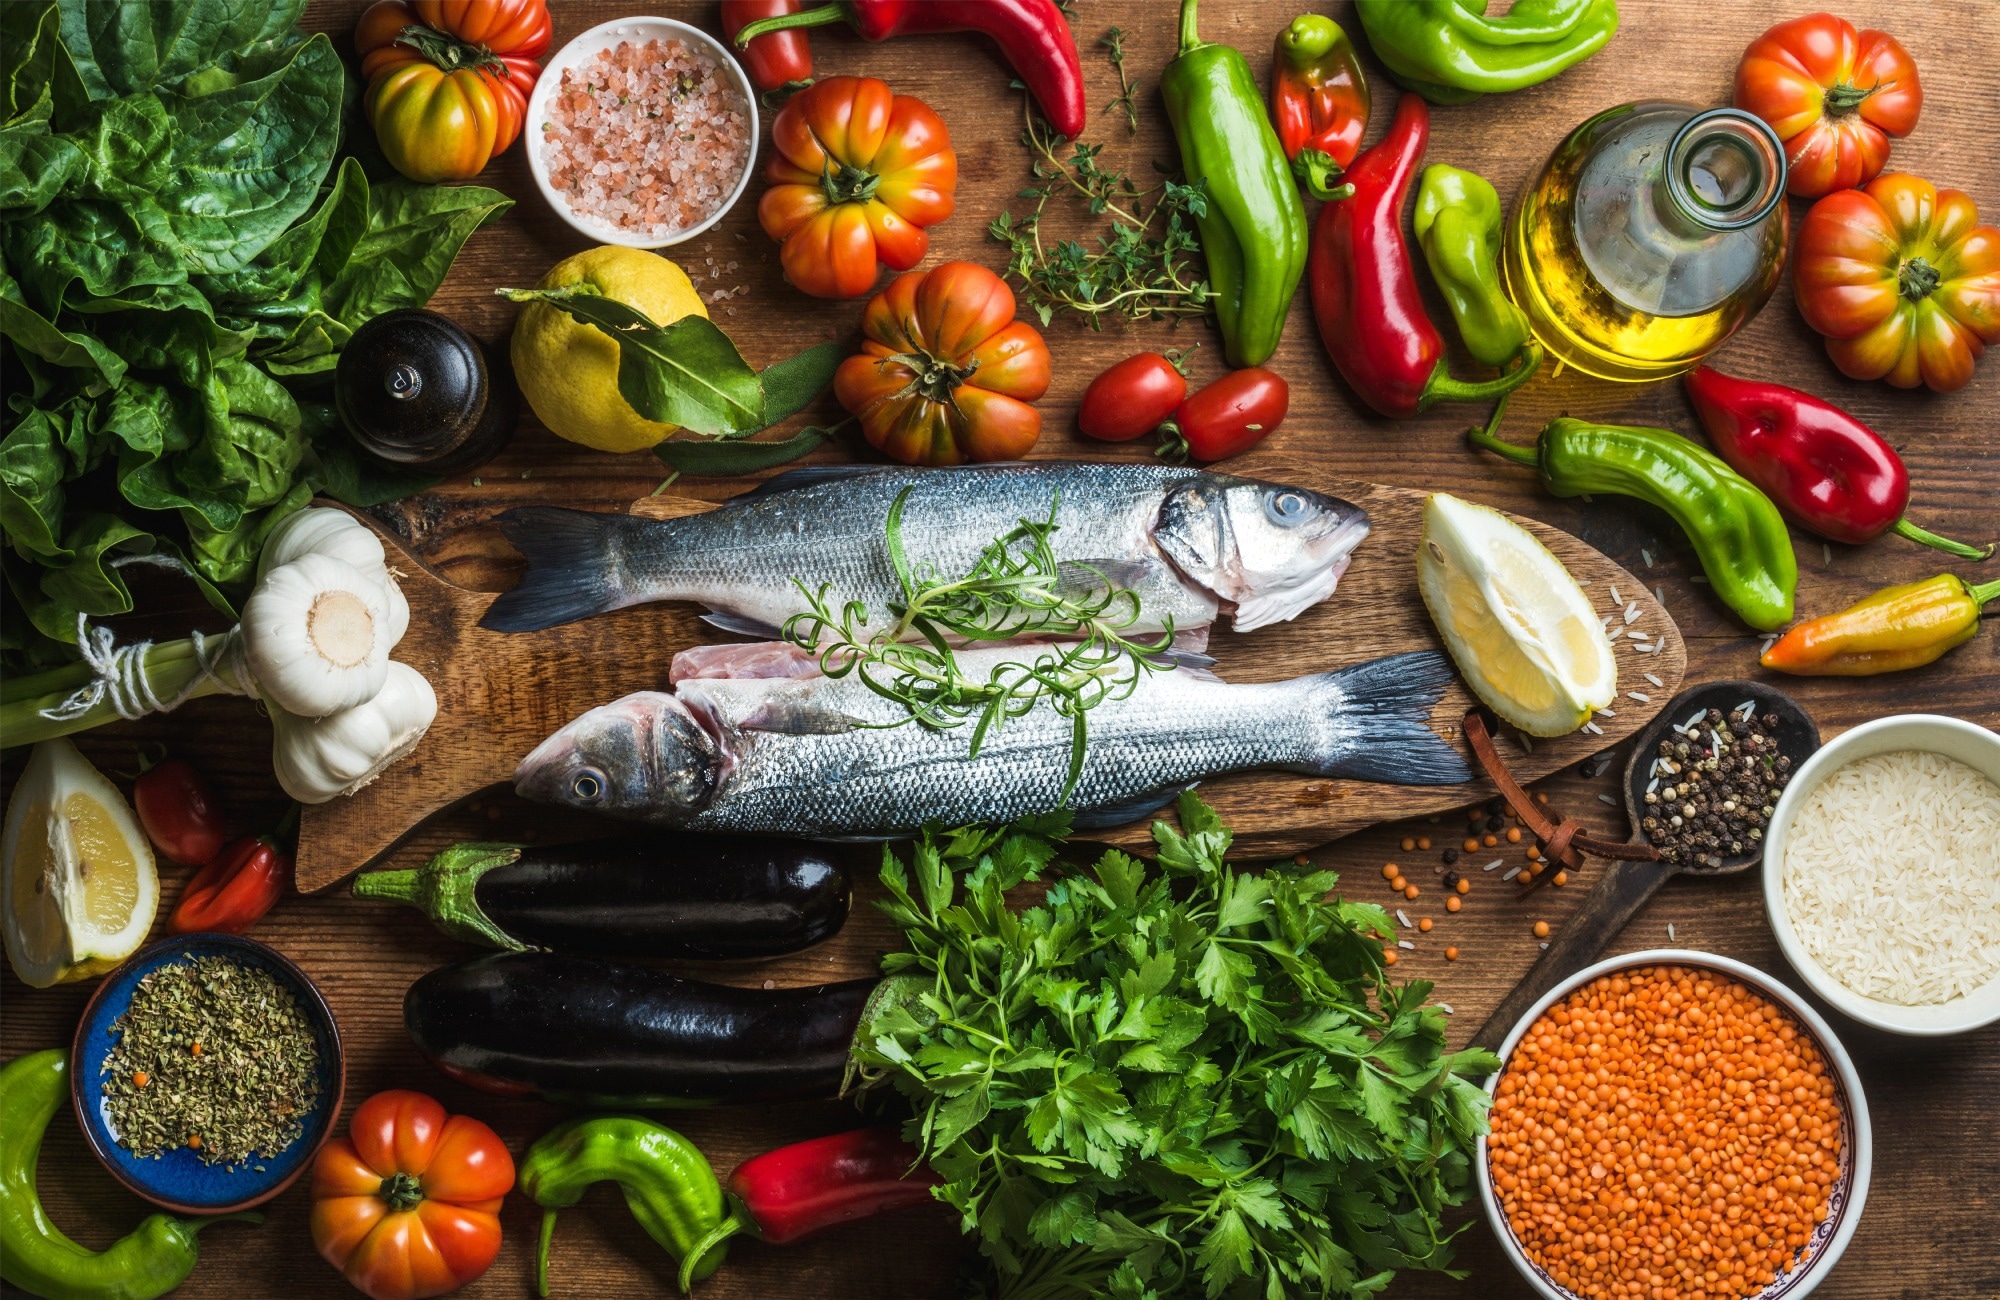 Study: Association between Depressive Symptoms and Adherence to the Mediterranean Diet in Nursing Students. Image Credit: FoxysForestManufacture/Shutterstock.com